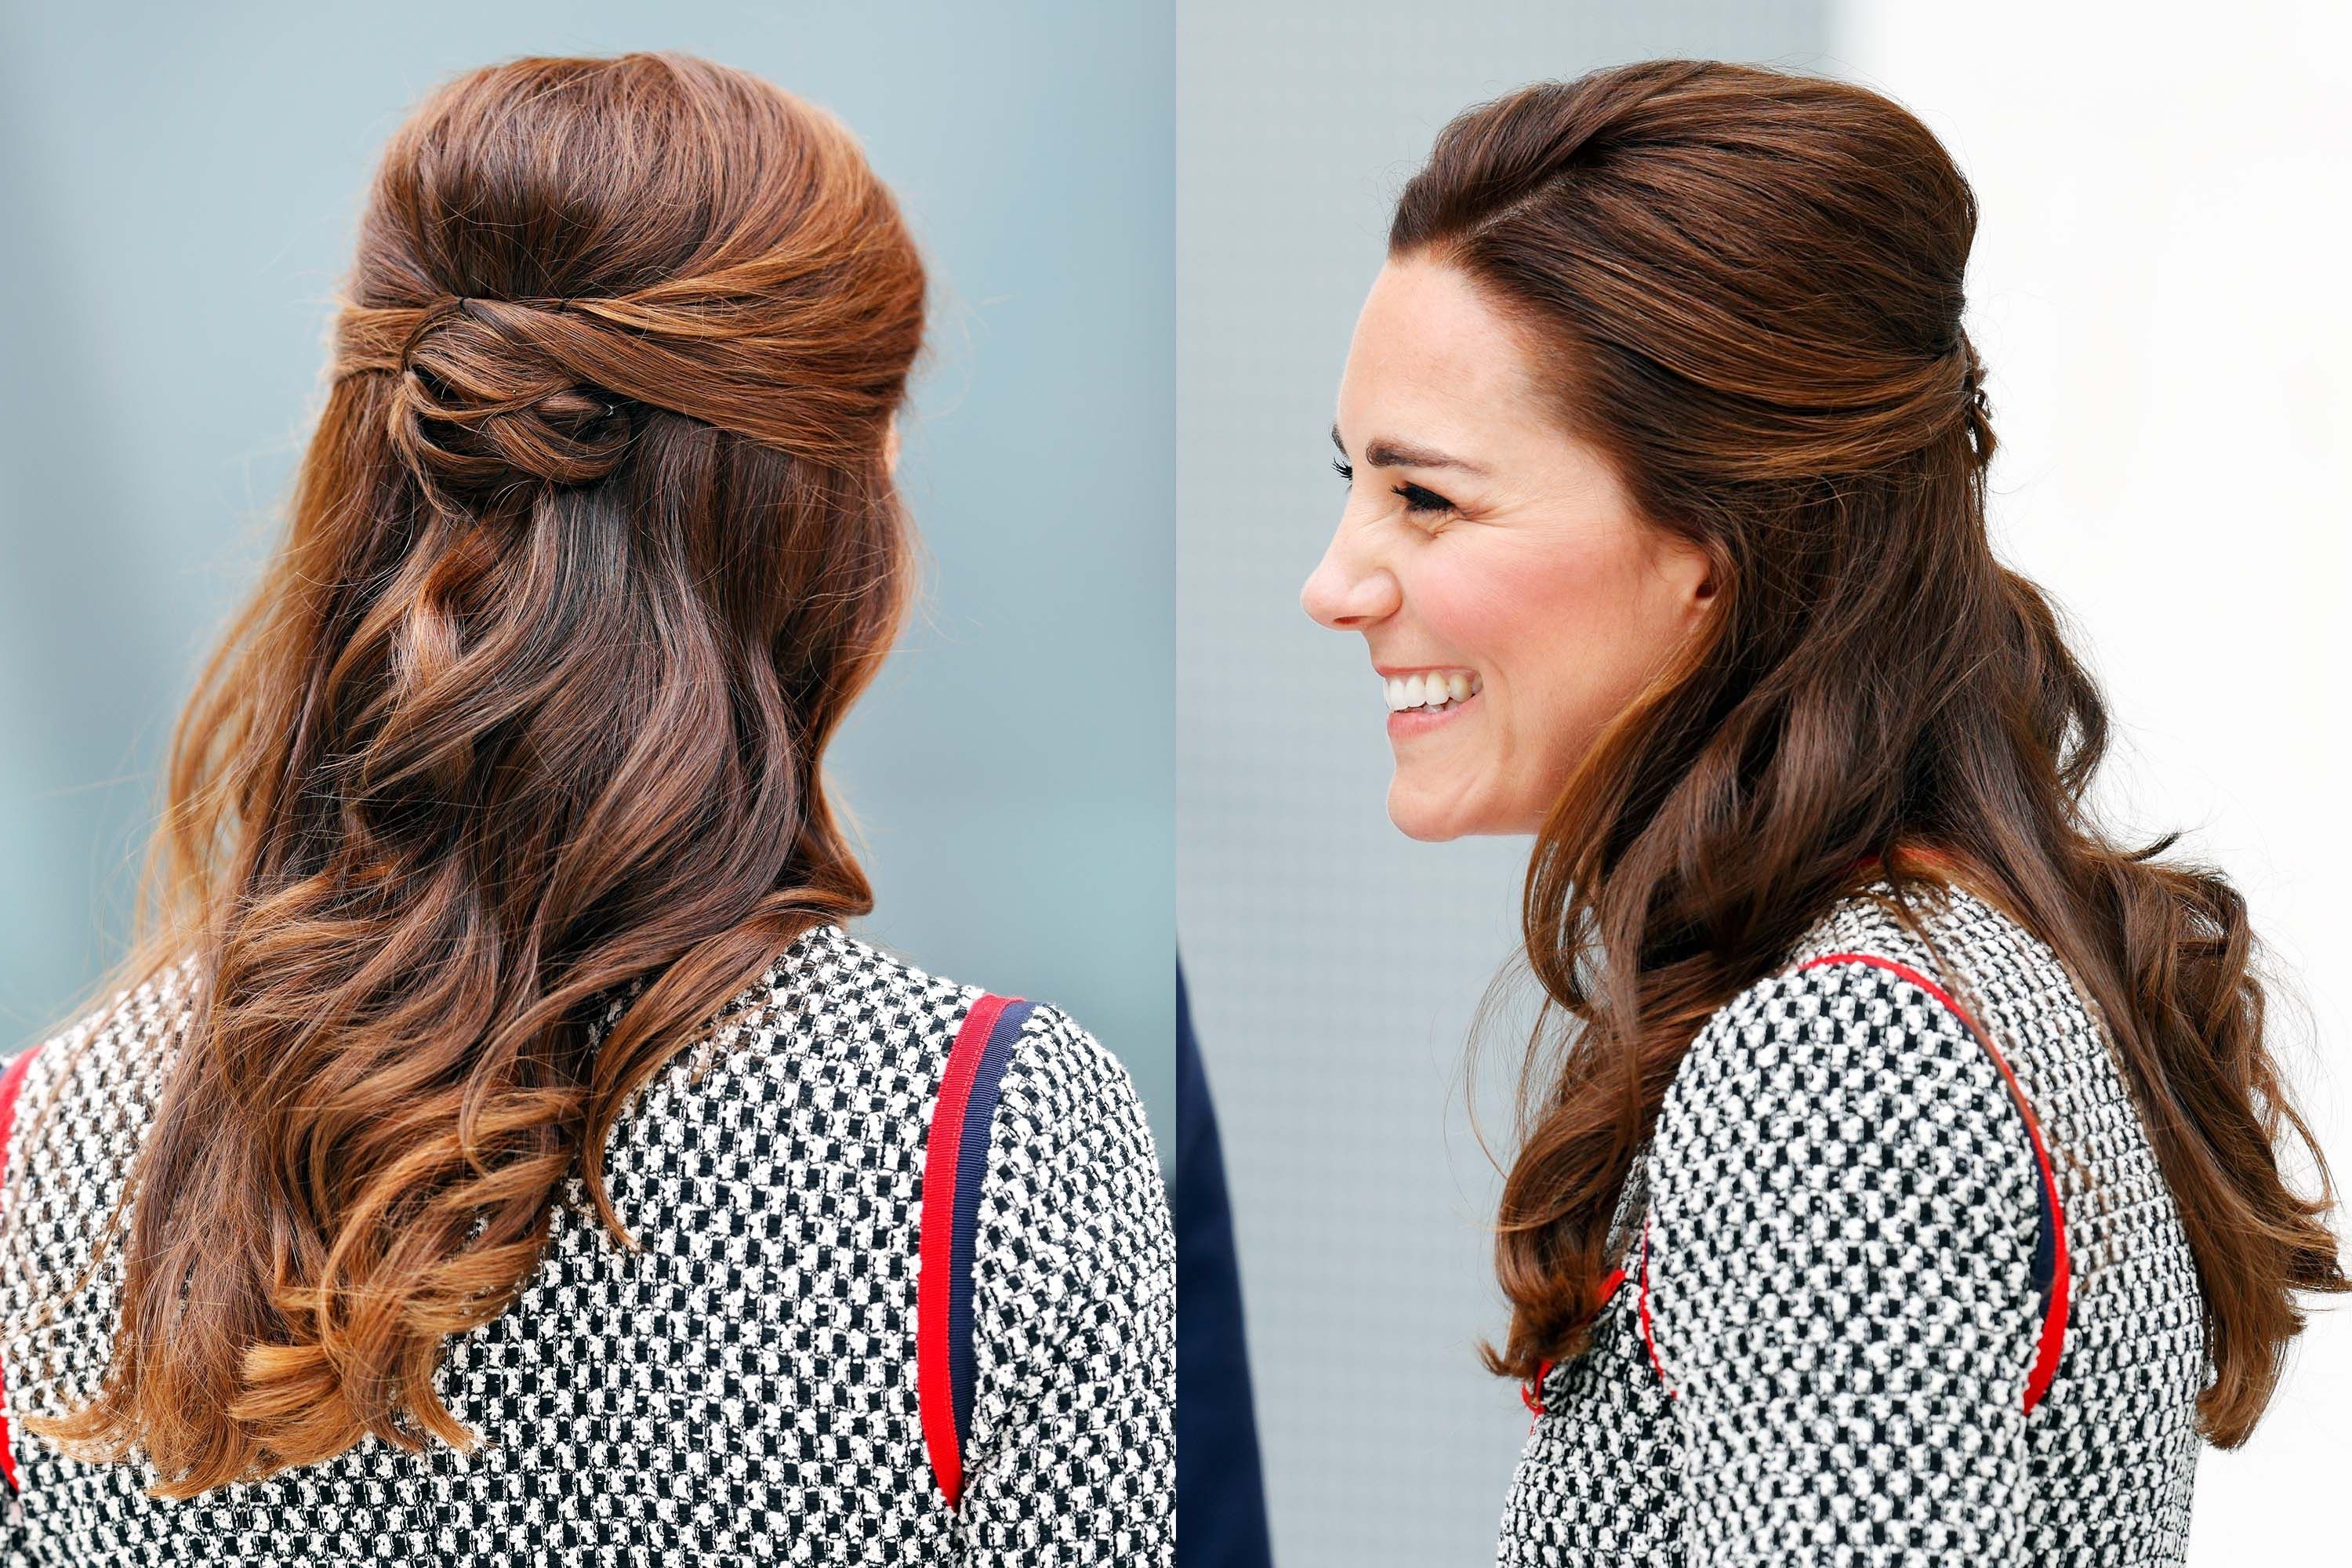 Preferred Princess Tie Ponytail Hairstyles For Kate Middleton's 37 Best Hair Looks – Our Favorite Princess Kate (View 12 of 20)